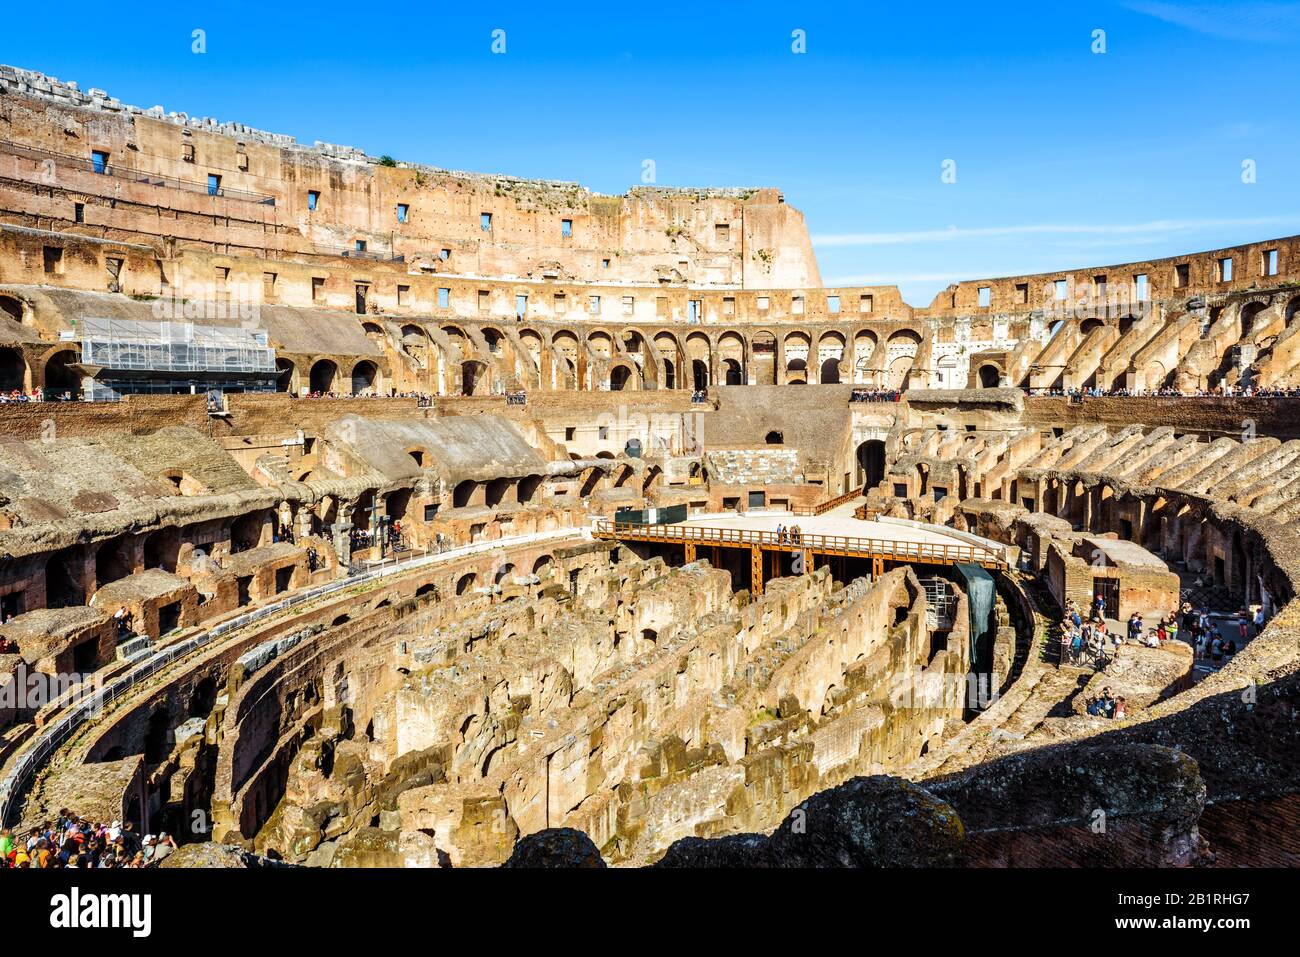 Colosseum inside, Rome, Italy. Famous Colosseum is a top landmark of Rome. Panorama of the Colosseum arena in summer. Remains of the Ancient Roman Emp Stock Photo